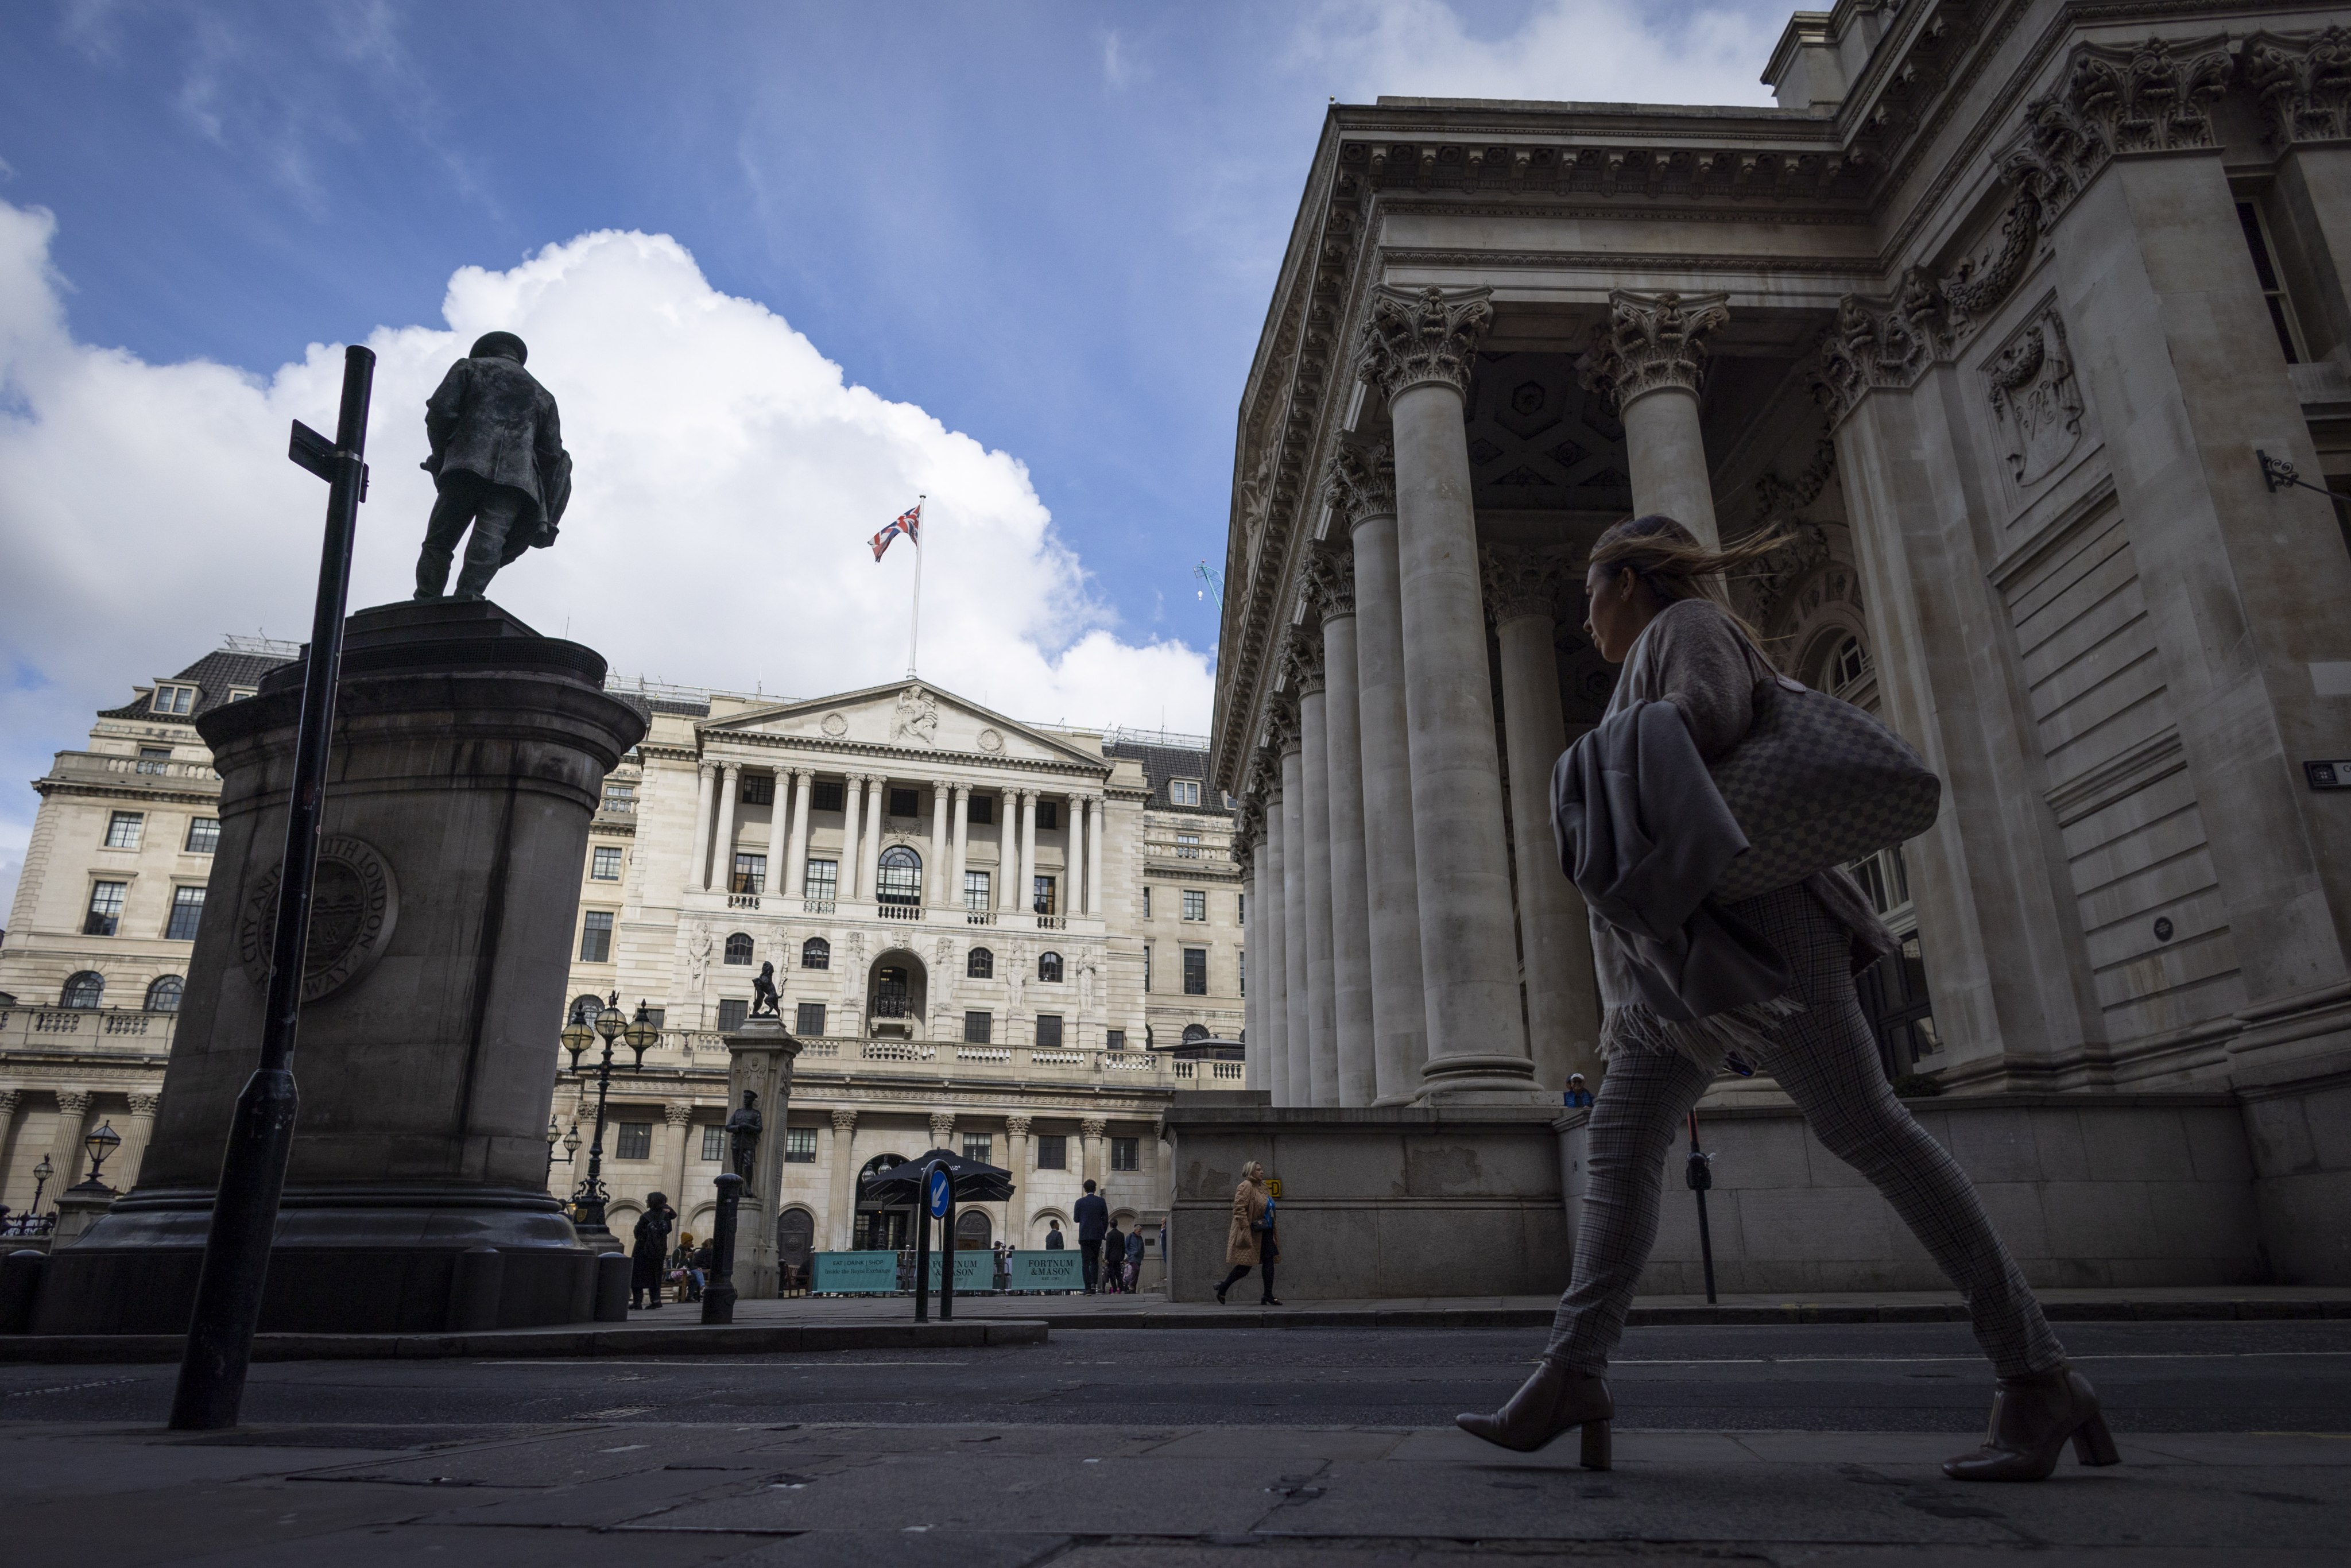 People walk past the Bank of England in London on September 29. The Bank of England set aside £65 billion (US$73.3 billion) to buy bonds in an attempt to stabilise Britain’s economy, underlining the turmoil in bond markets. Photo: EPA-EFE